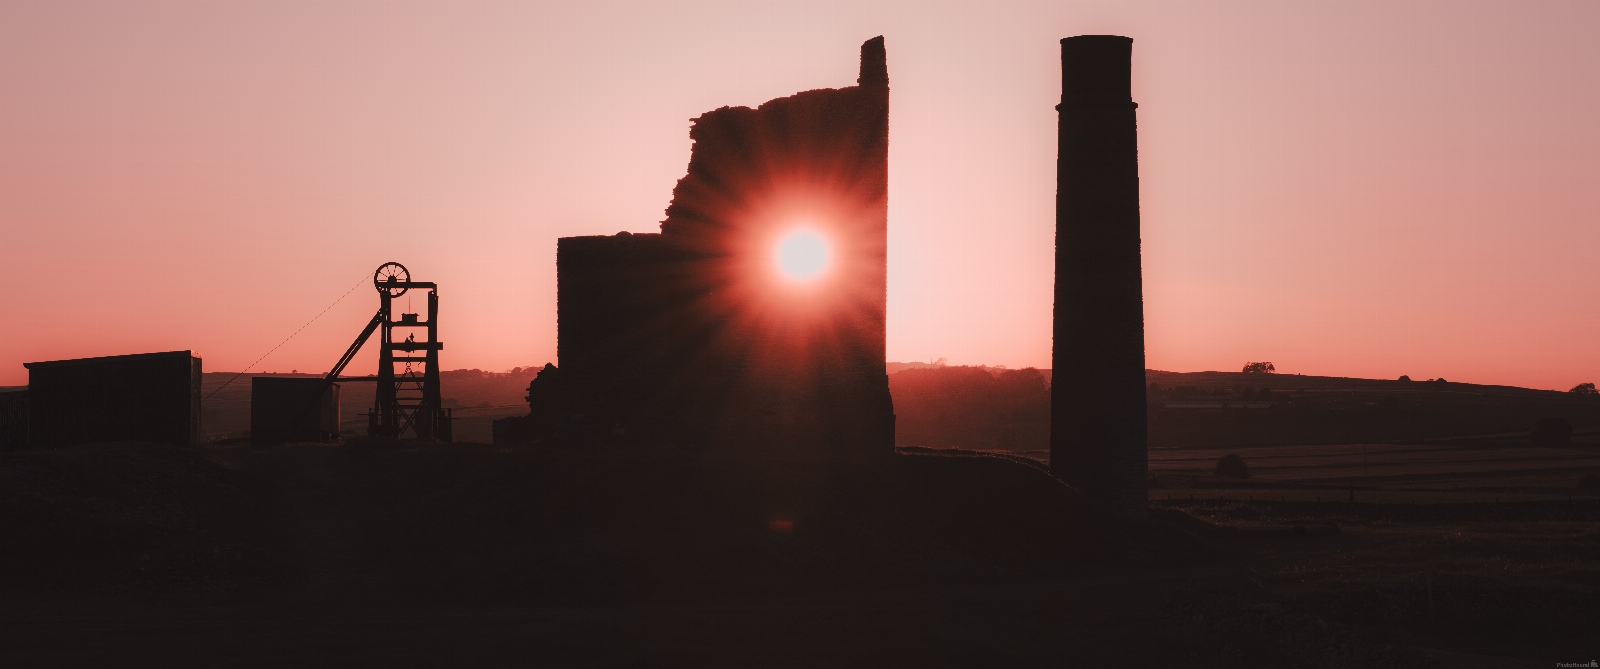 Image of Magpie Mine by Phil Tooze